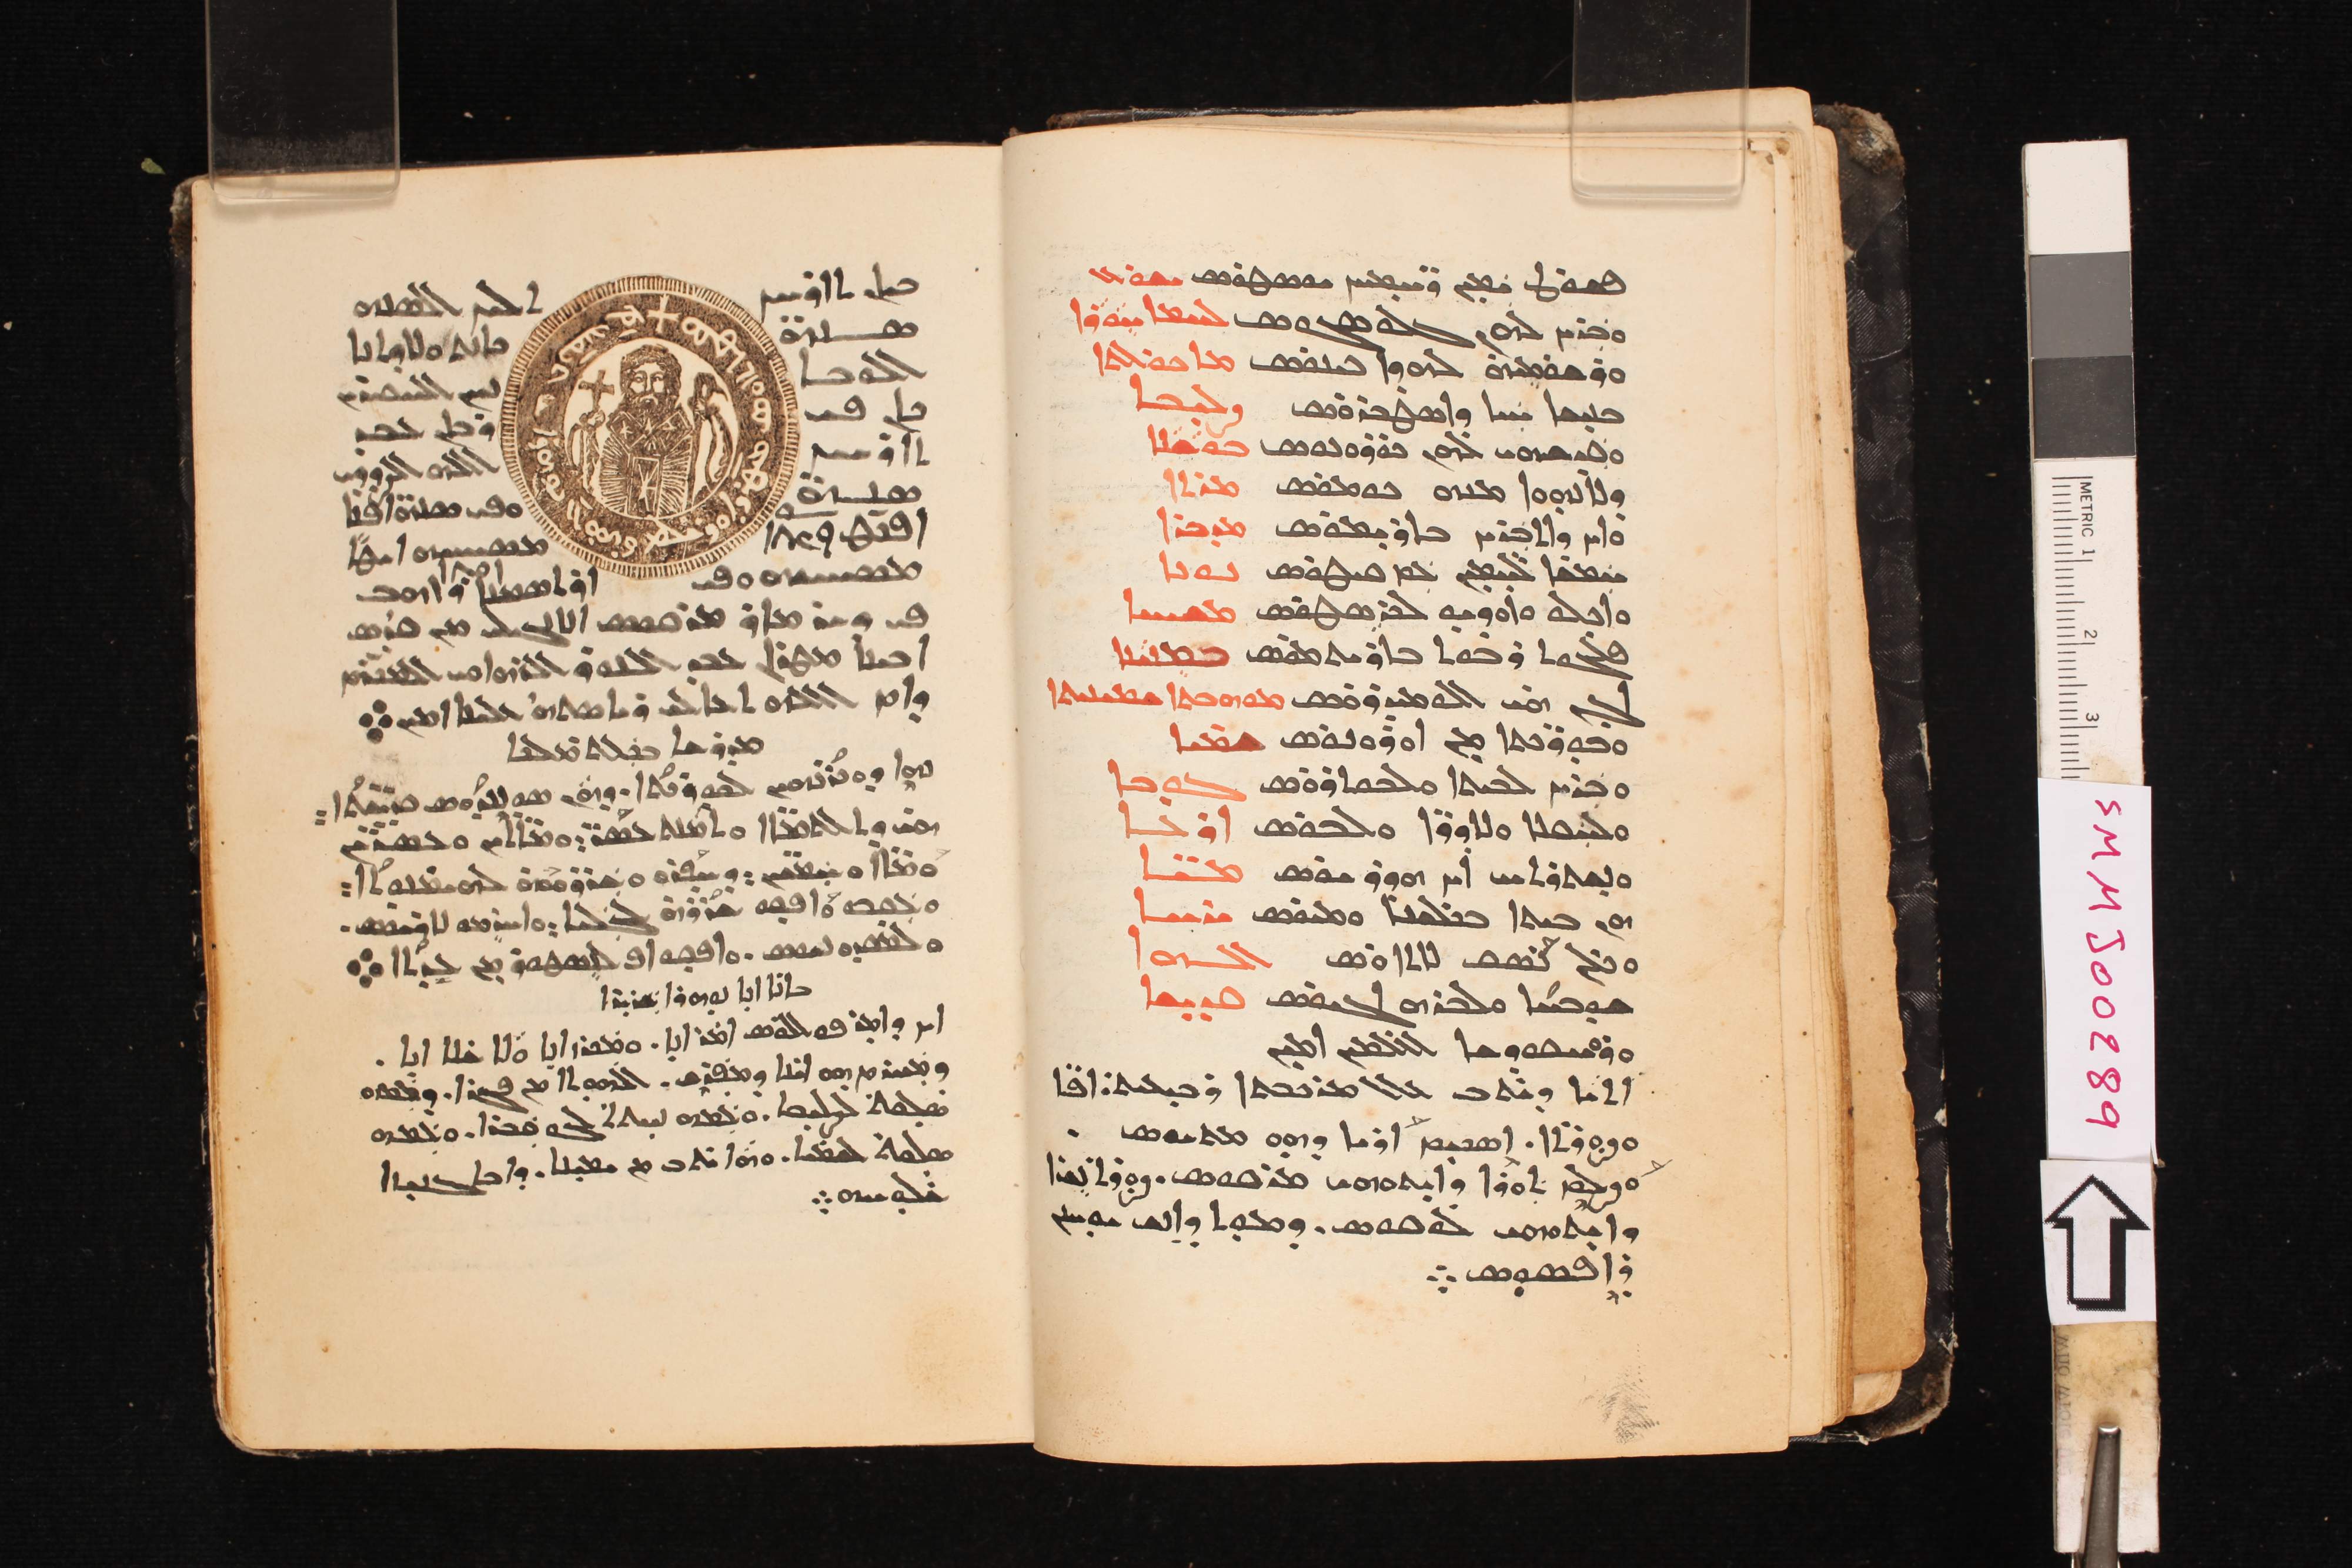 19th-c. poetic and liturgical miscellany in Arabic Garshuni and Syriac, Saint Mark’s Monastery (<a href='https://w3id.org/vhmml/readingRoom/view/502772'>SMMJ 289</a>)